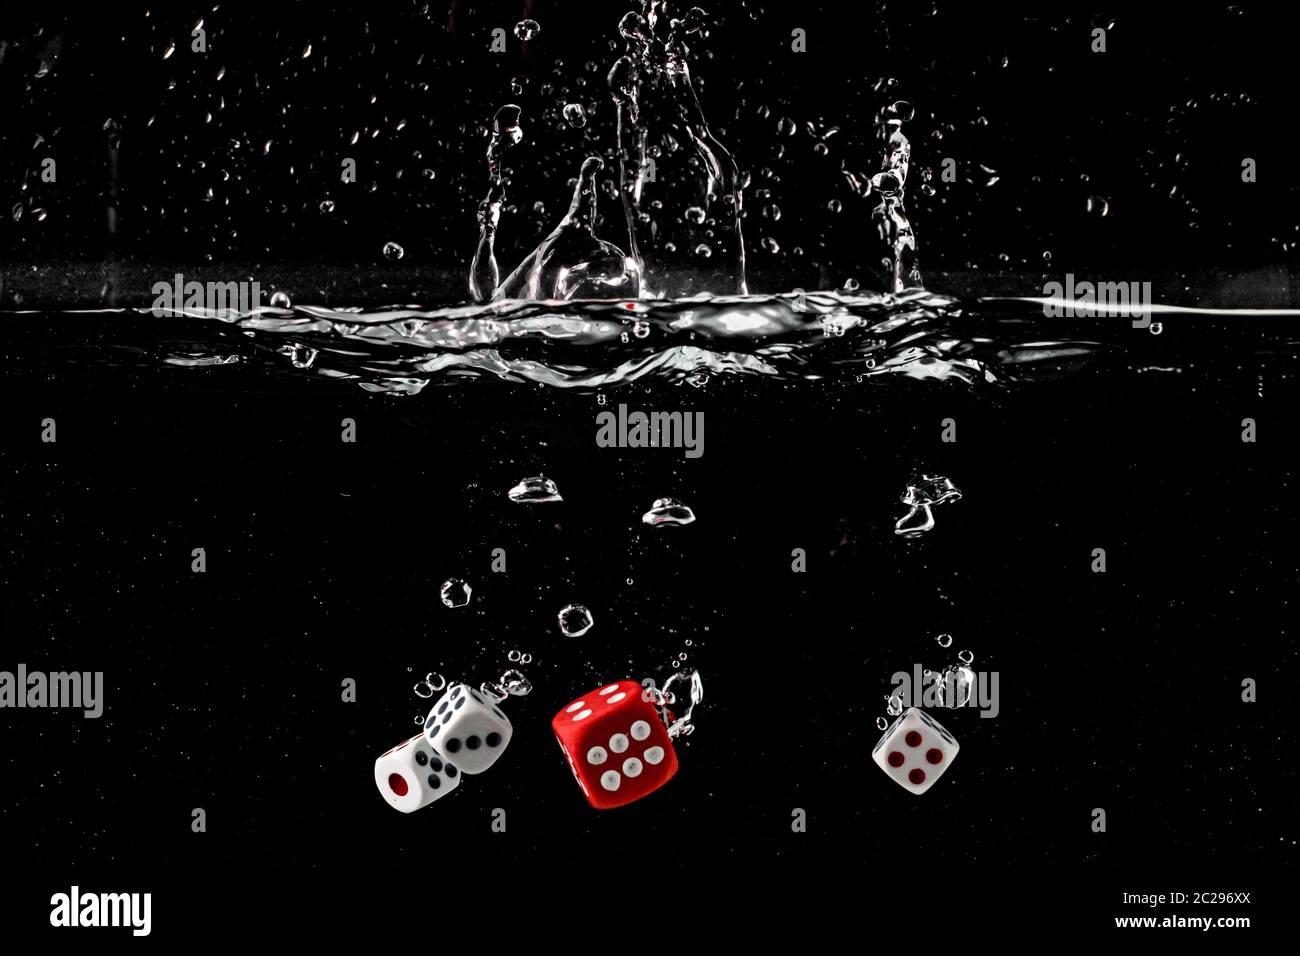 Ludo dice in water splash on black background with lots of air bubbles Stock Photo